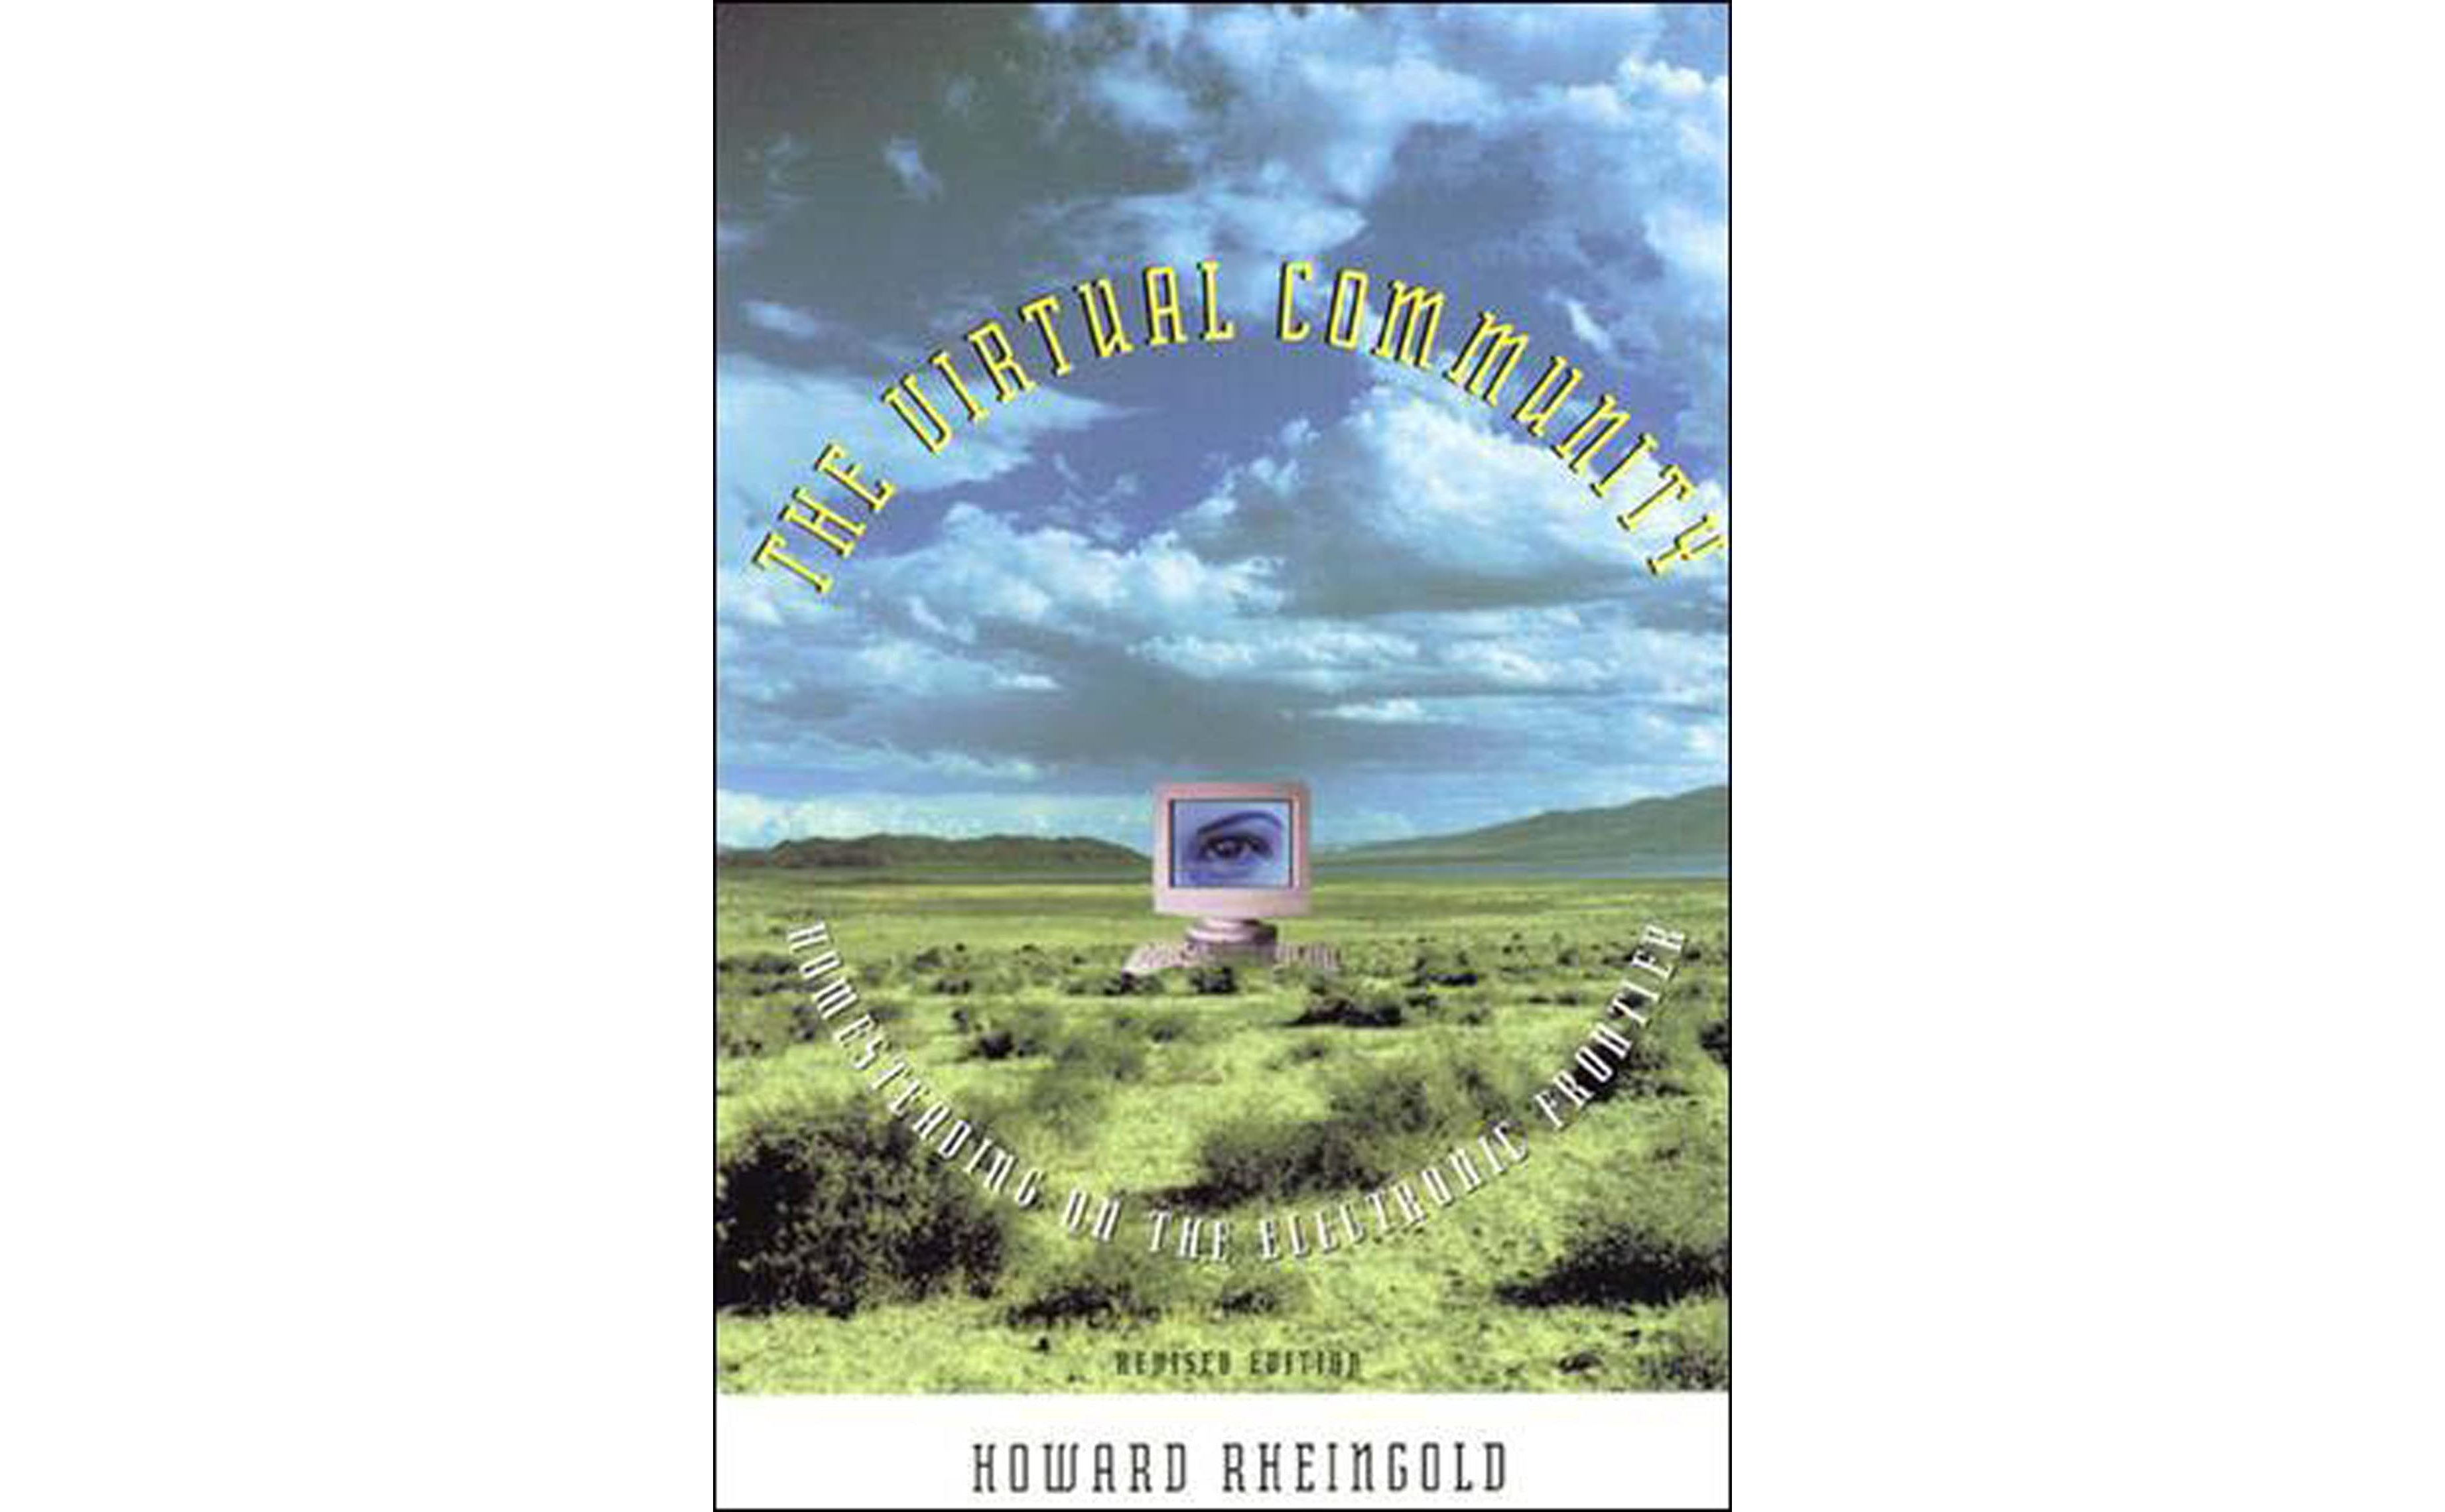 Howard's 1993 "The Virtual Community" book. Image from Amazon.